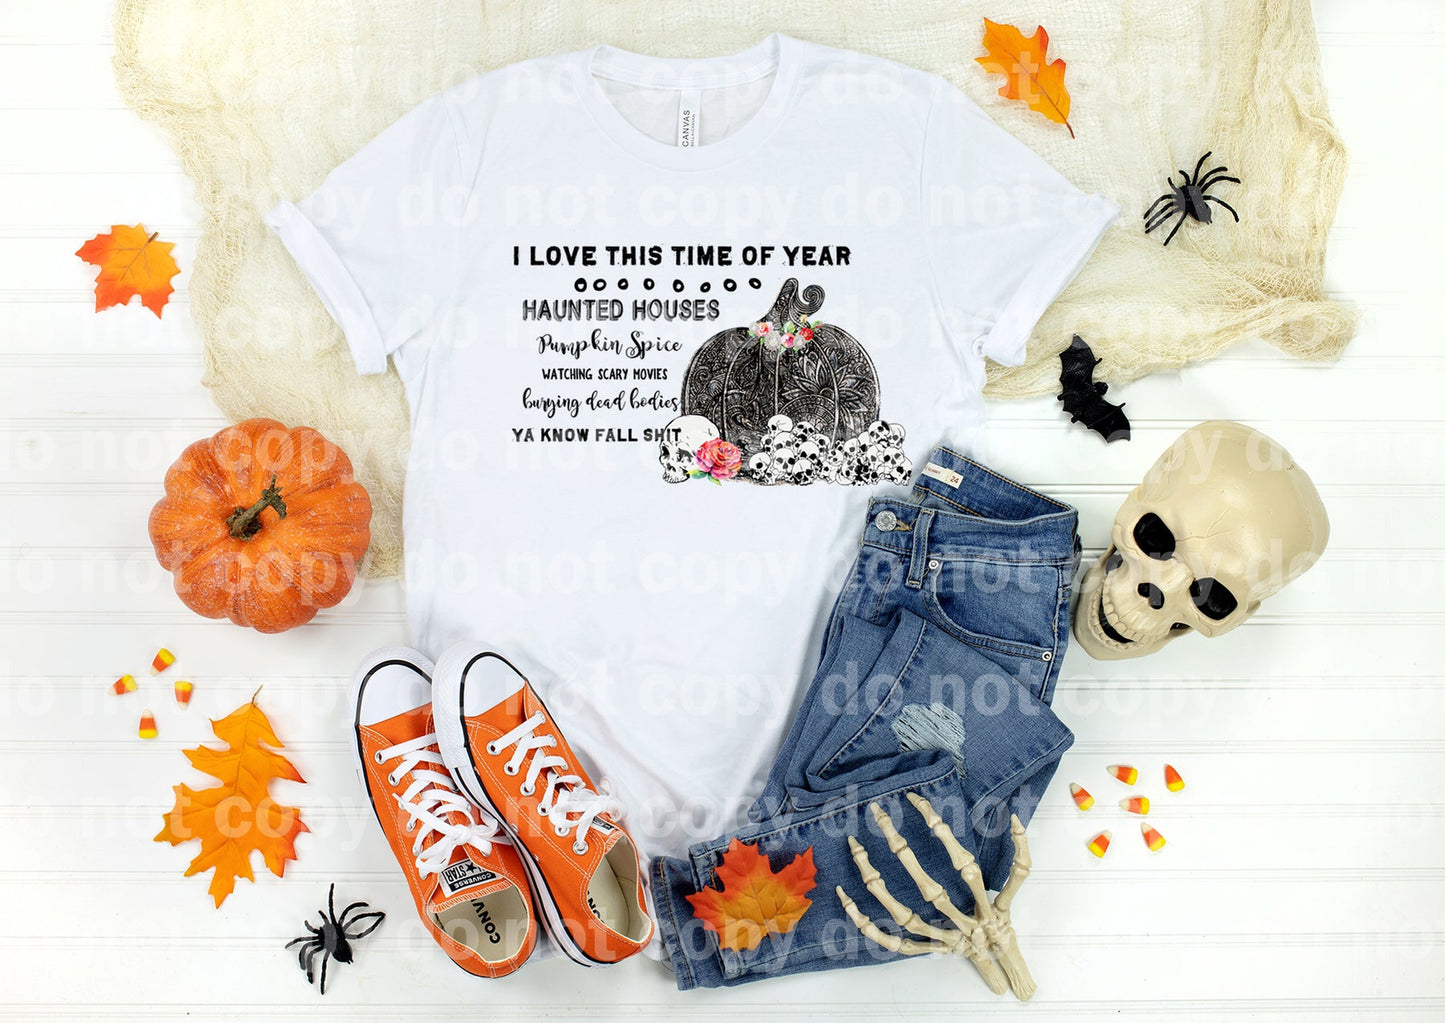 I Love This Time of Year Haunted Houses Pumpkin Spice Watching Scary Movies Burying Dead Bodies Ya Know Fall Shit Dream Print or Sublimation Print